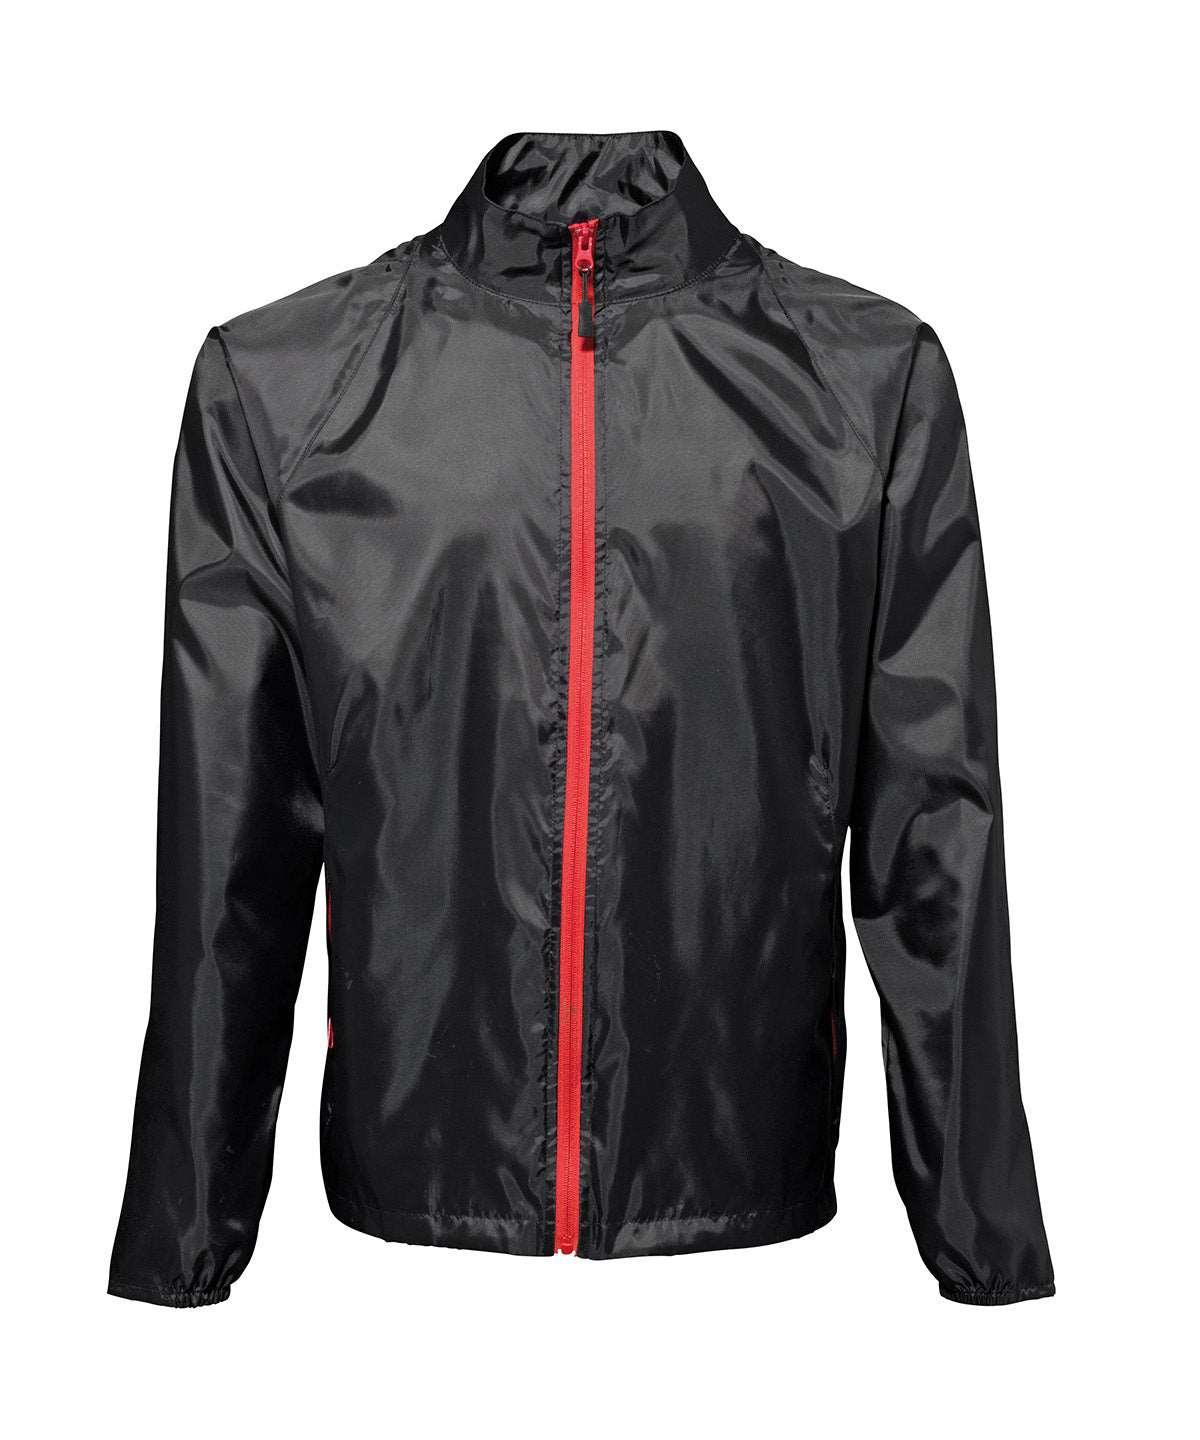 Amber/Black - Contrast lightweight jacket Jackets 2786 Alfresco Dining, Camo, Jackets & Coats, Lightweight layers, Rebrandable, S/S 19 Trend Colours Schoolwear Centres